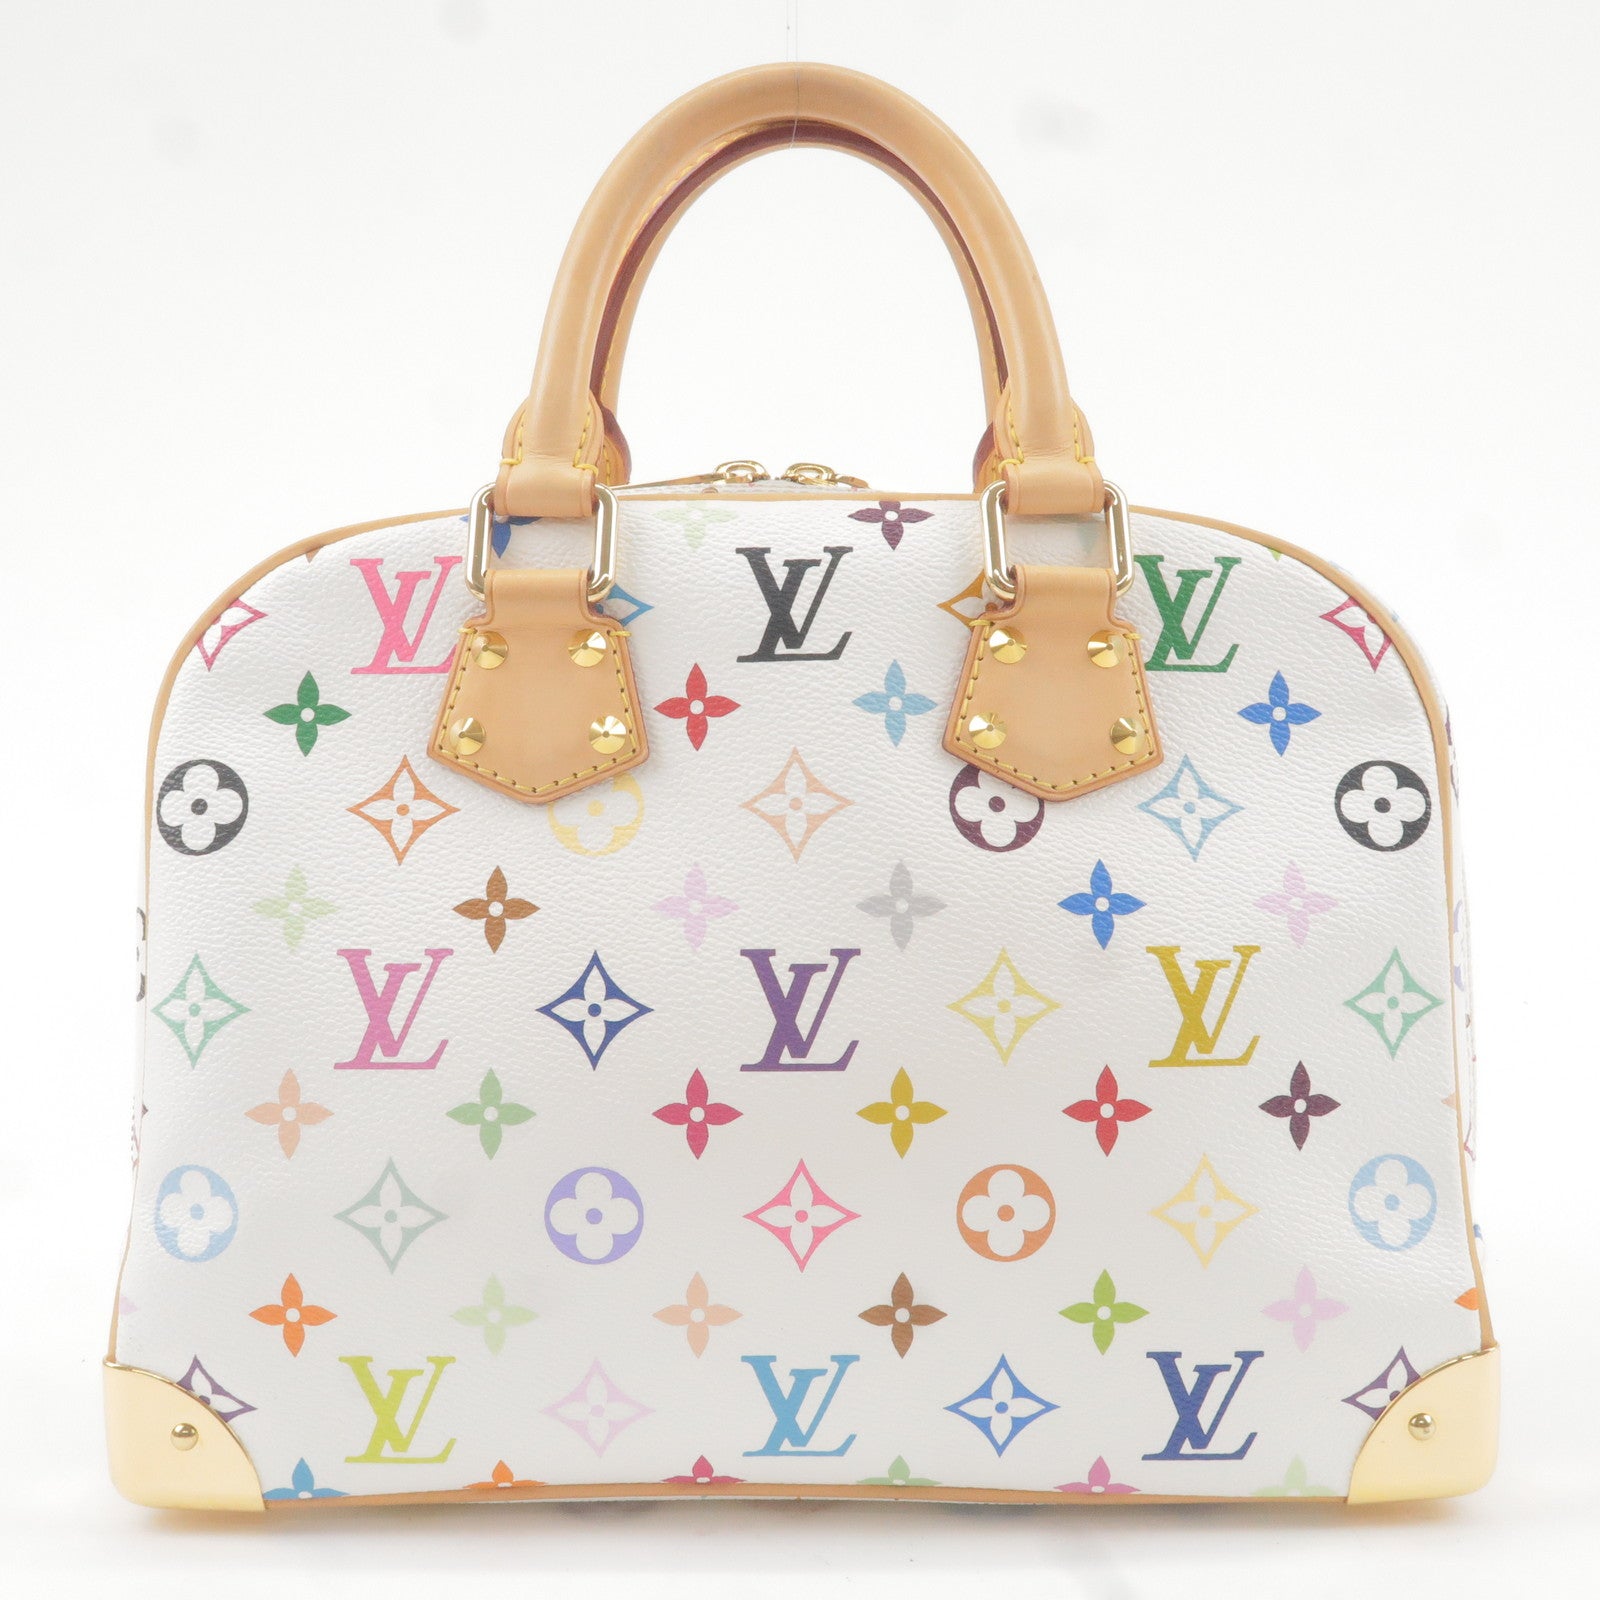  WHAT GOES AROUND COMES AROUND Women's Pre-Loved Louis Vuitton  White Multi Wapity Case, White, One Size : Luxury Stores